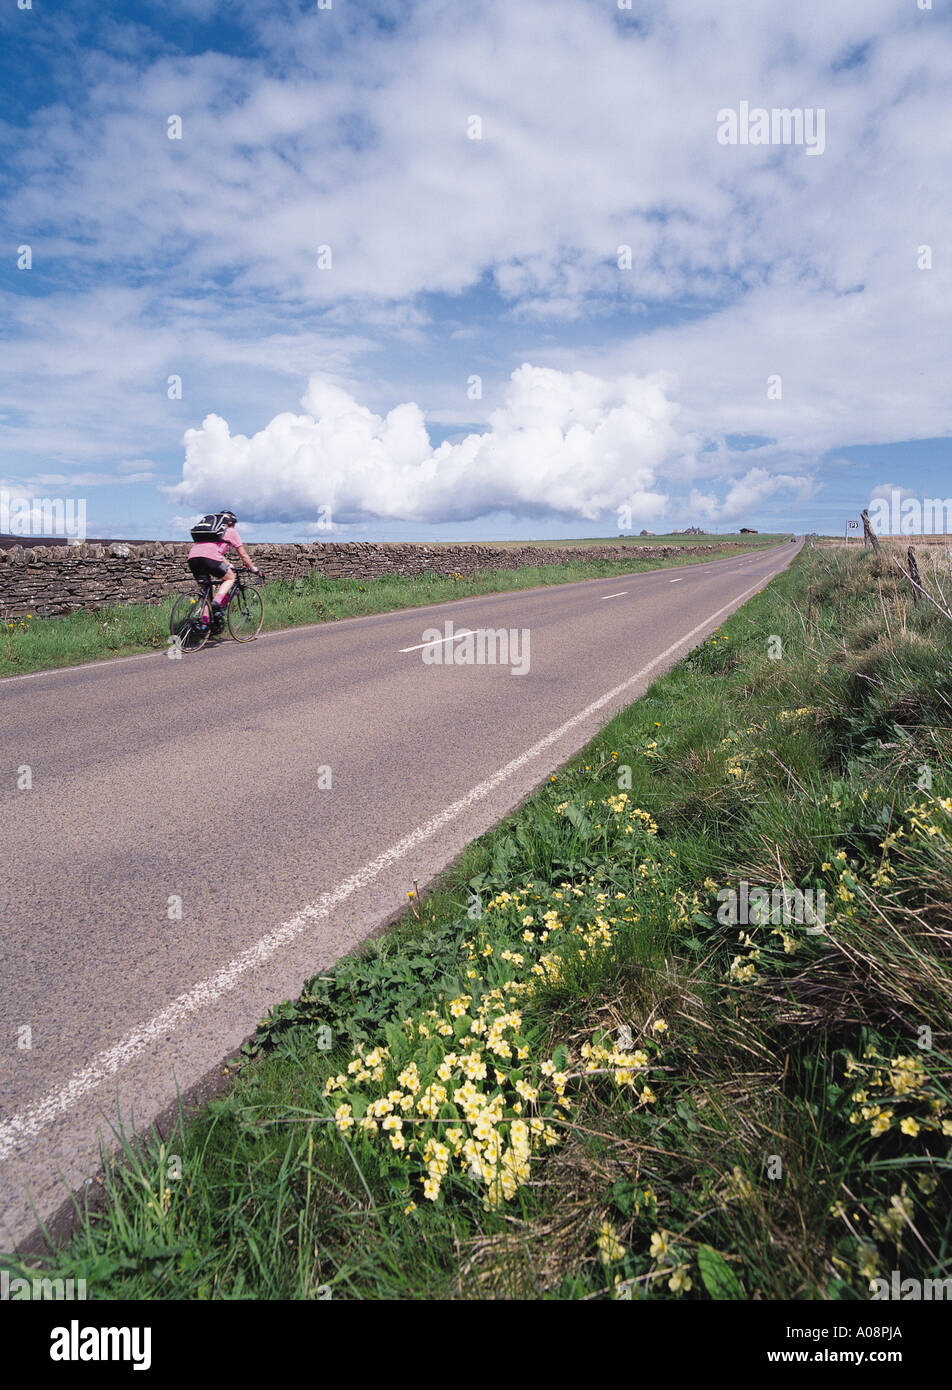 dh Hobbister ORPHIR ORKNEY Road cyclist countryside cycling country bike outdoors uk cycle scotland Stock Photo